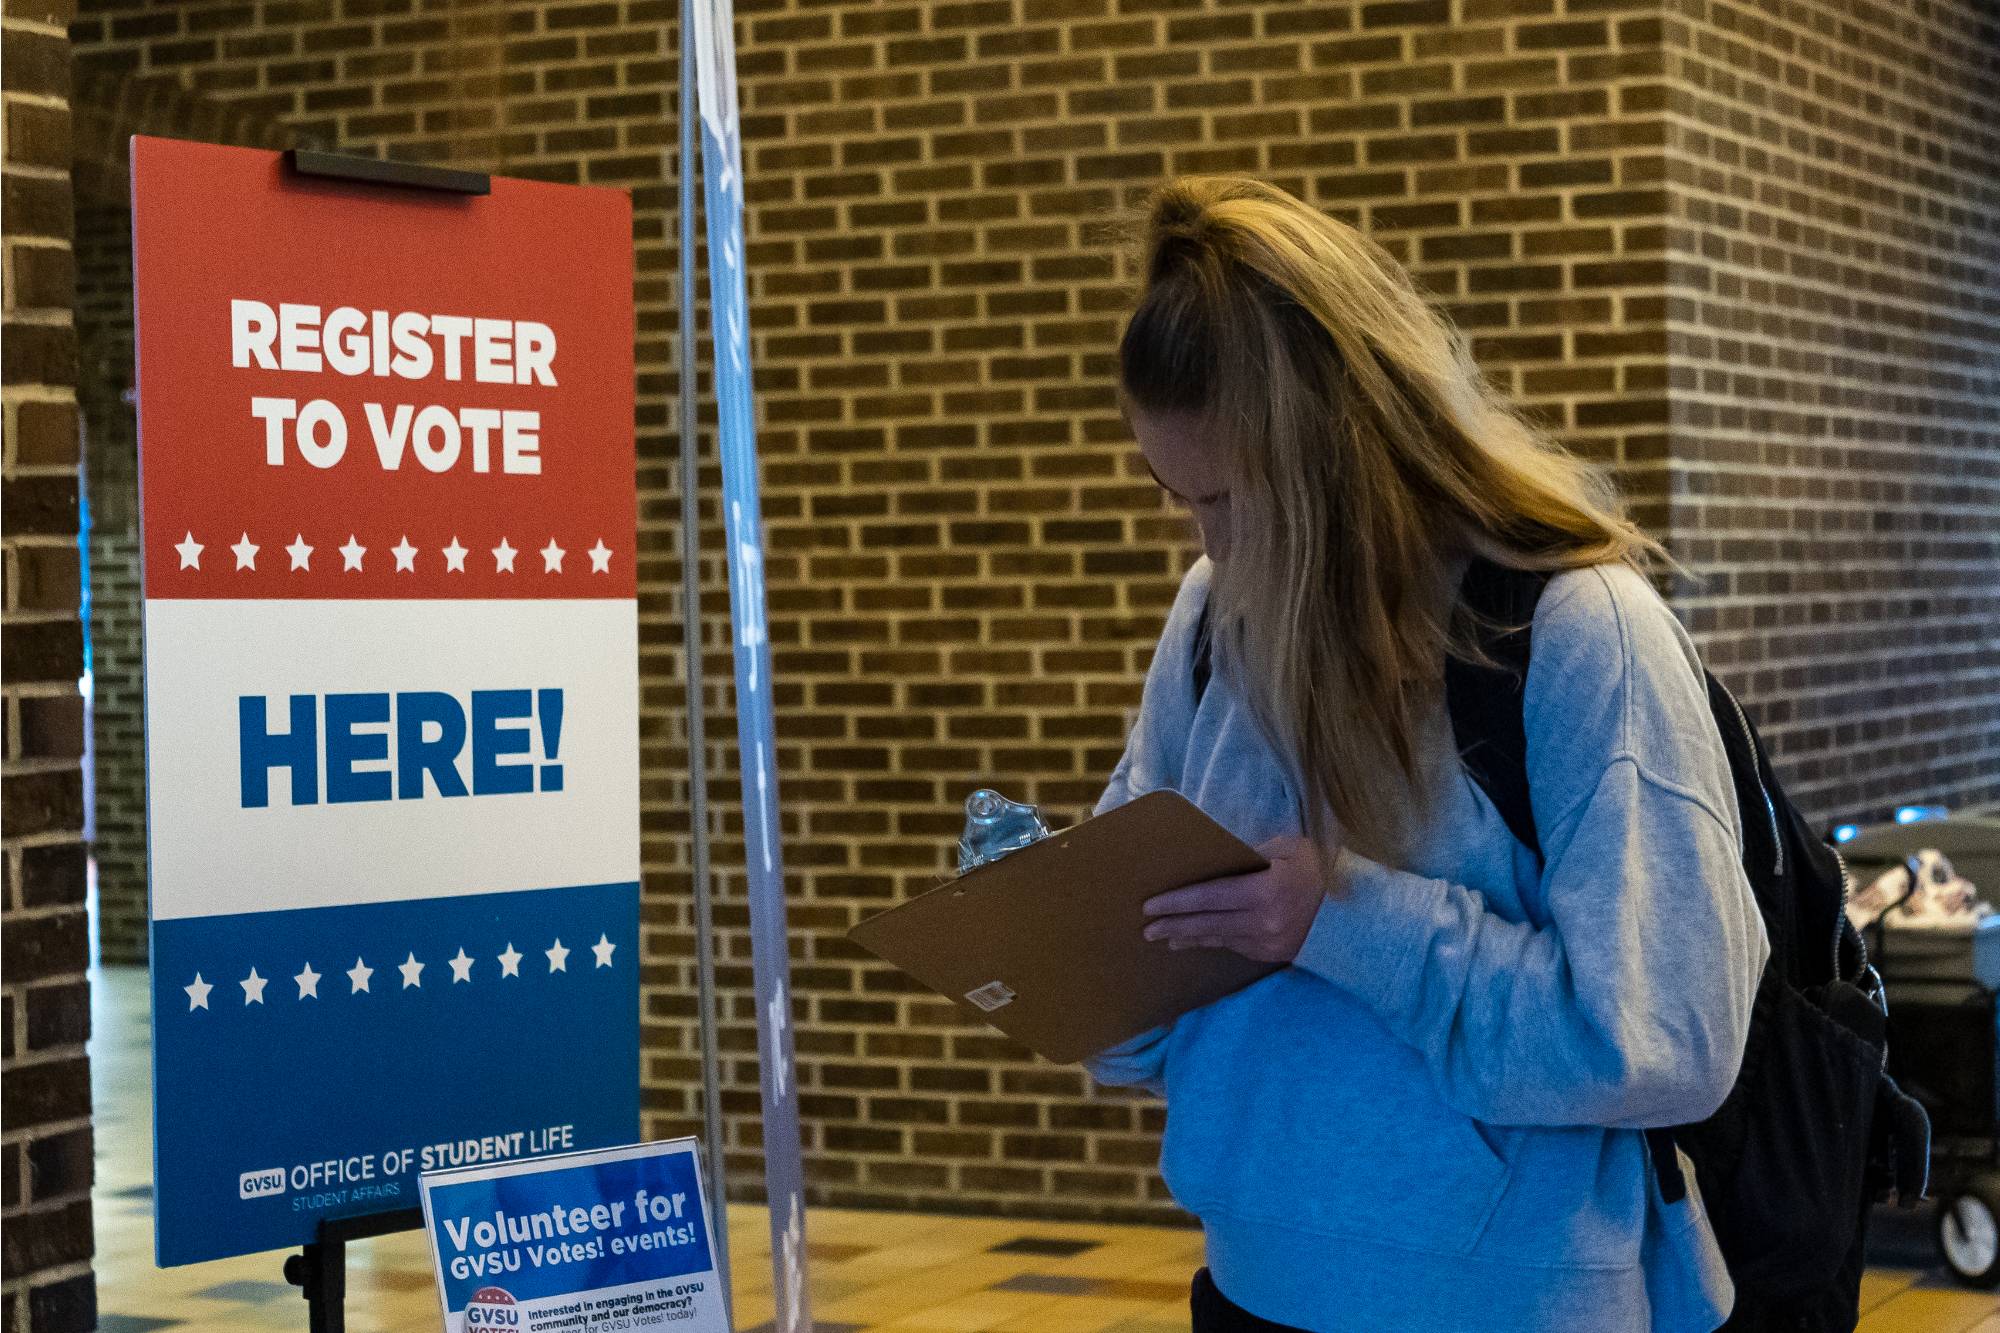 A student registering to vote in front of a register to vote sign